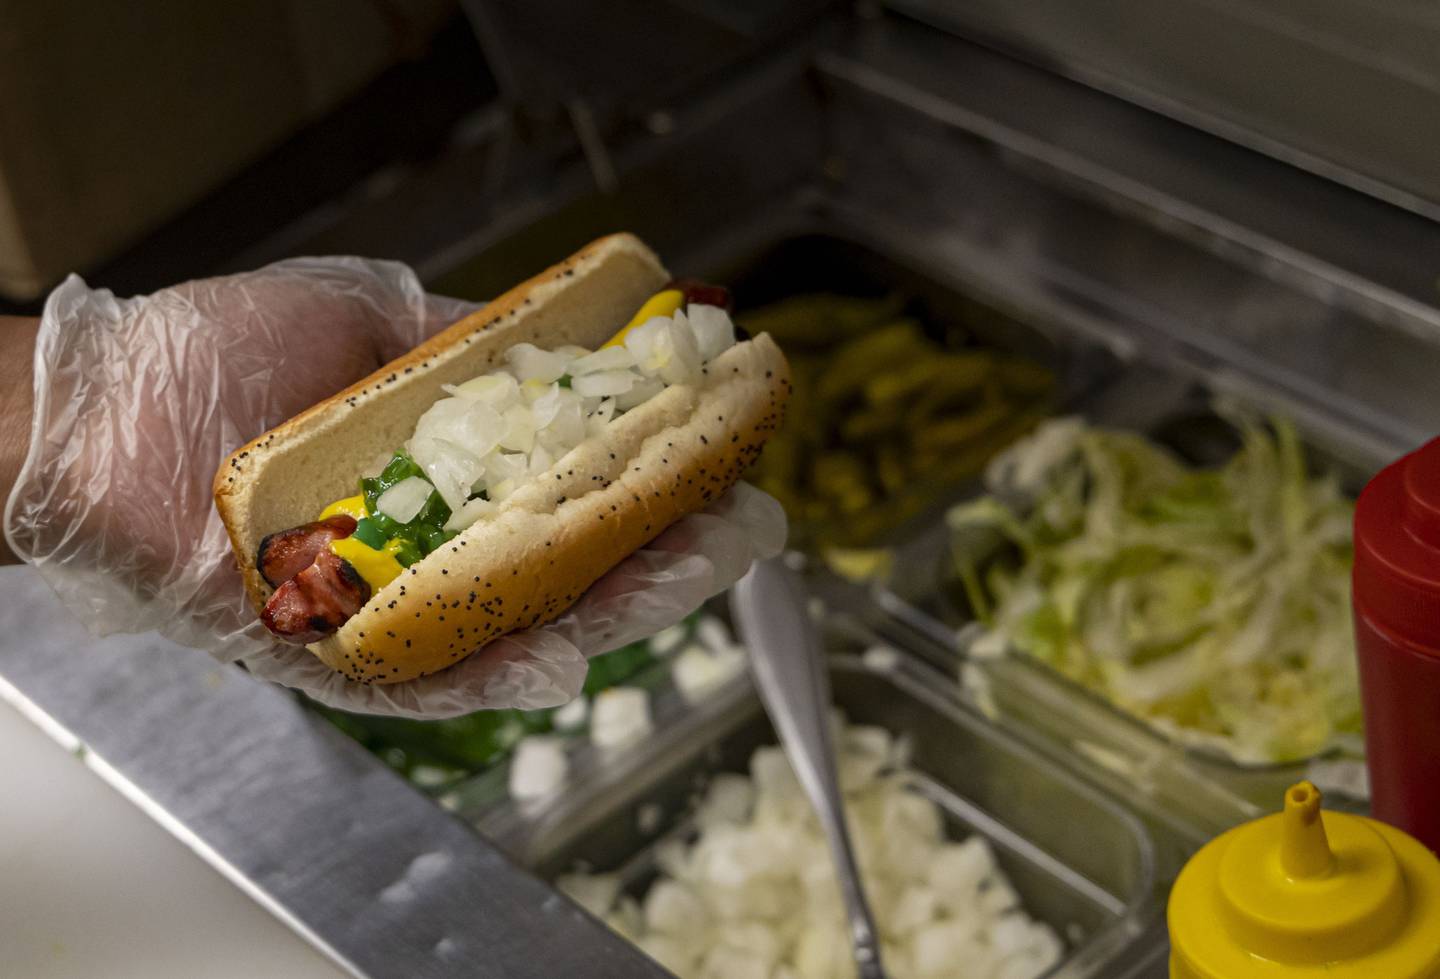 A char dog is prepared with all the toppings at The Wiener’s Circle.